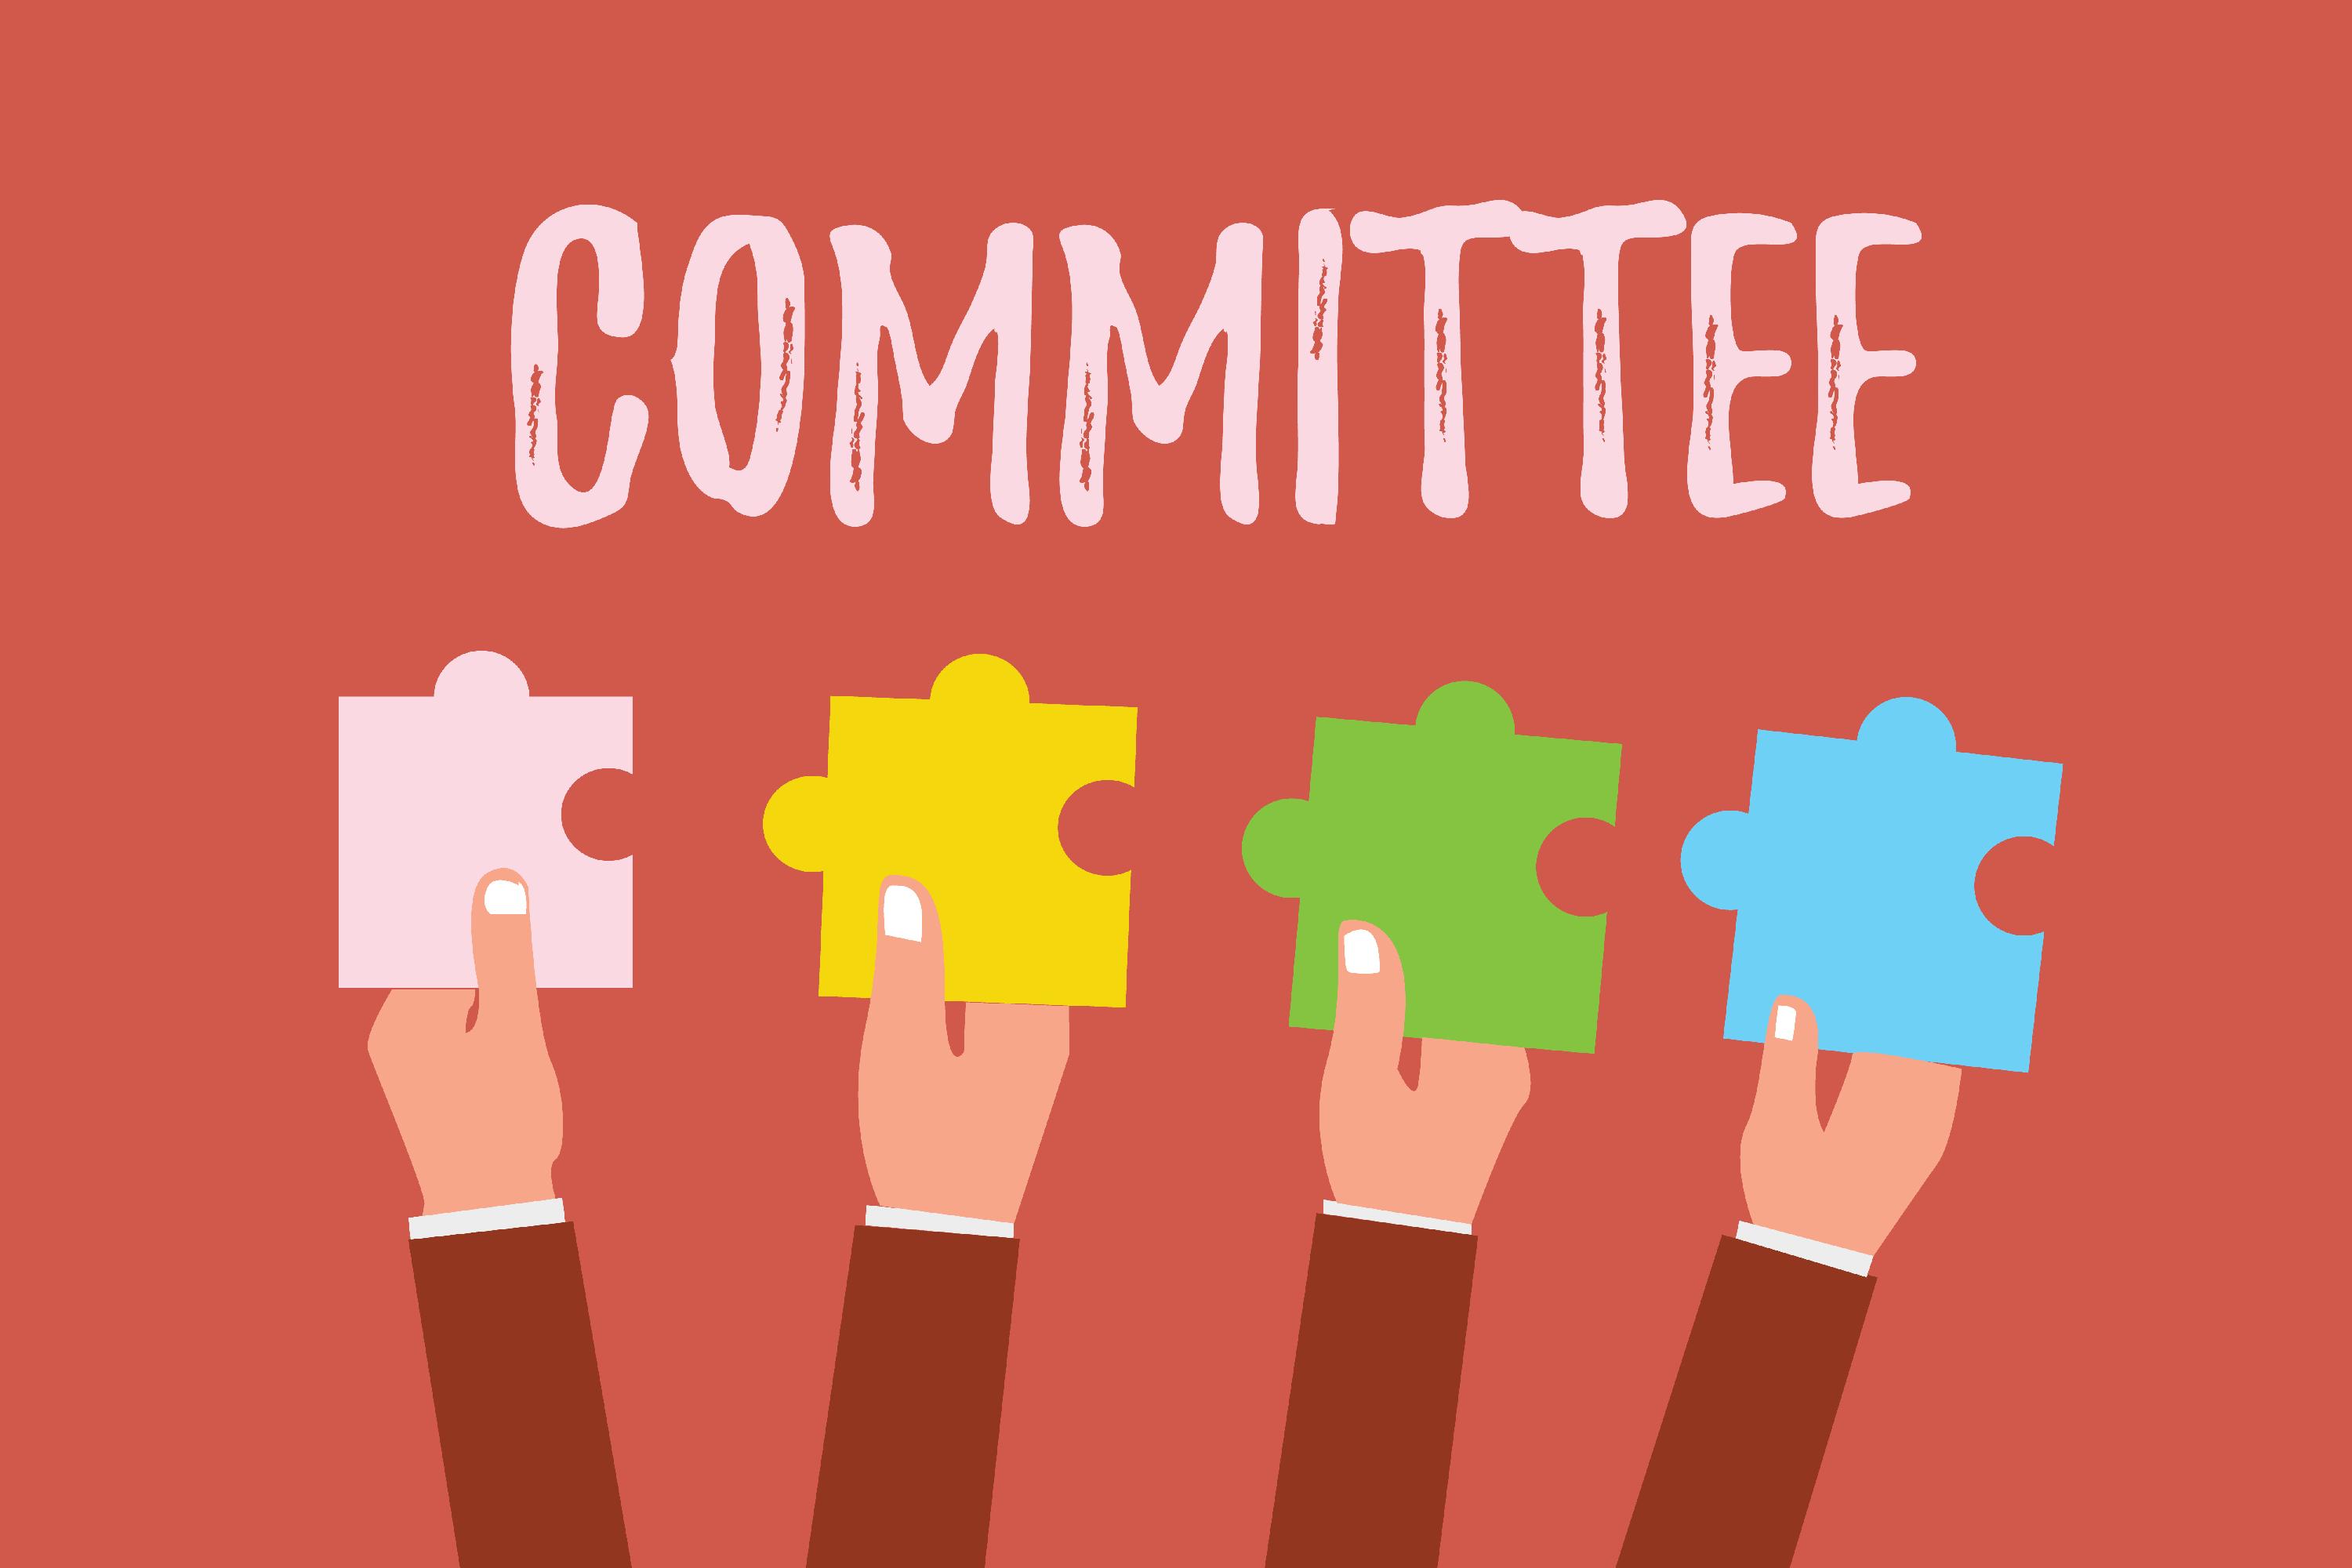 Committee puzzle pieces